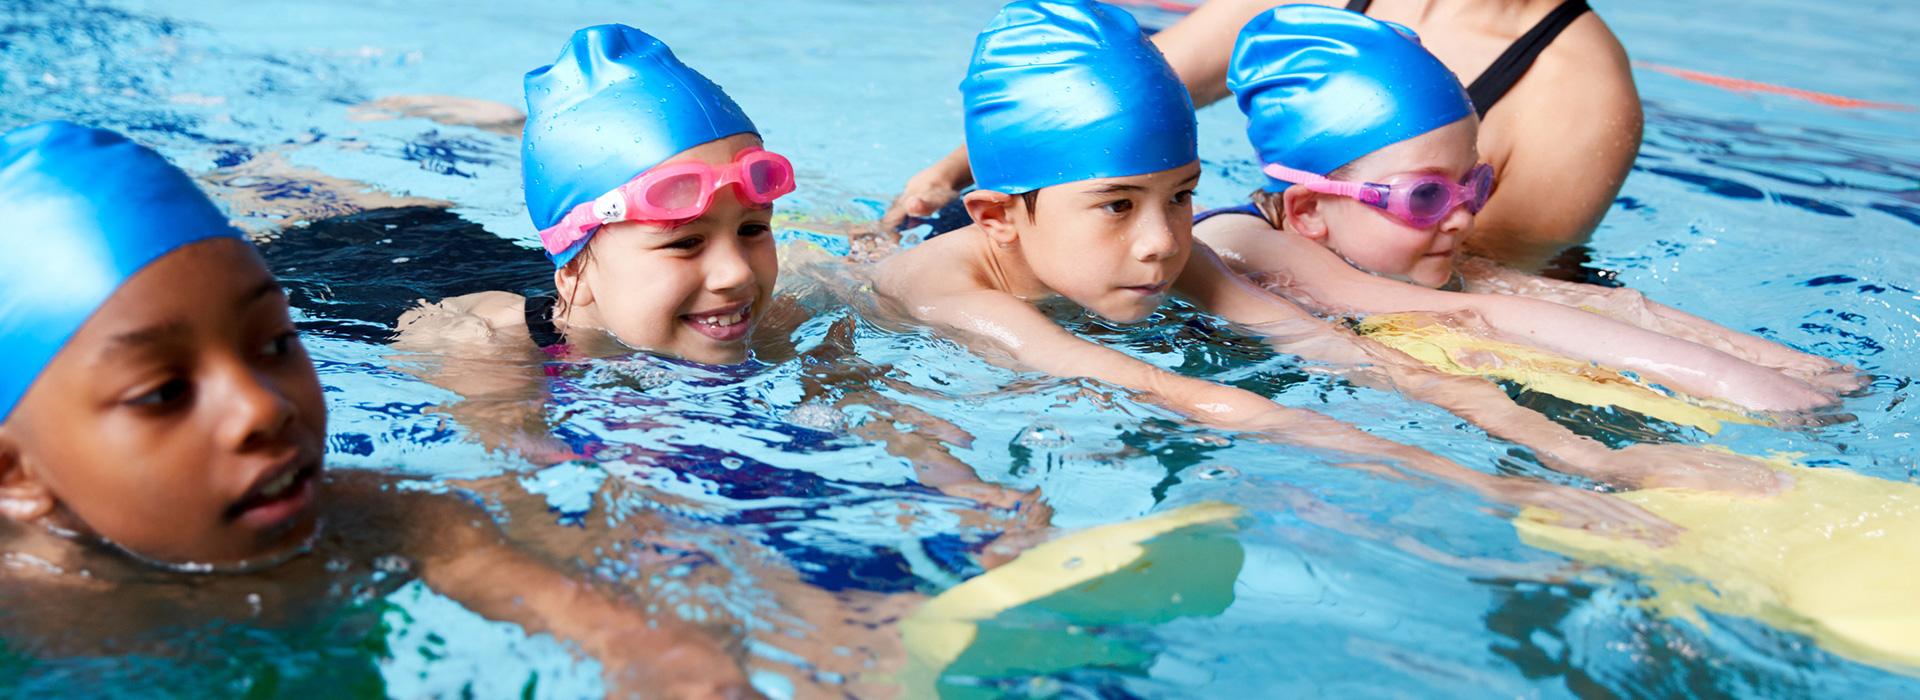 Group of young children in swim lesson using kickboards